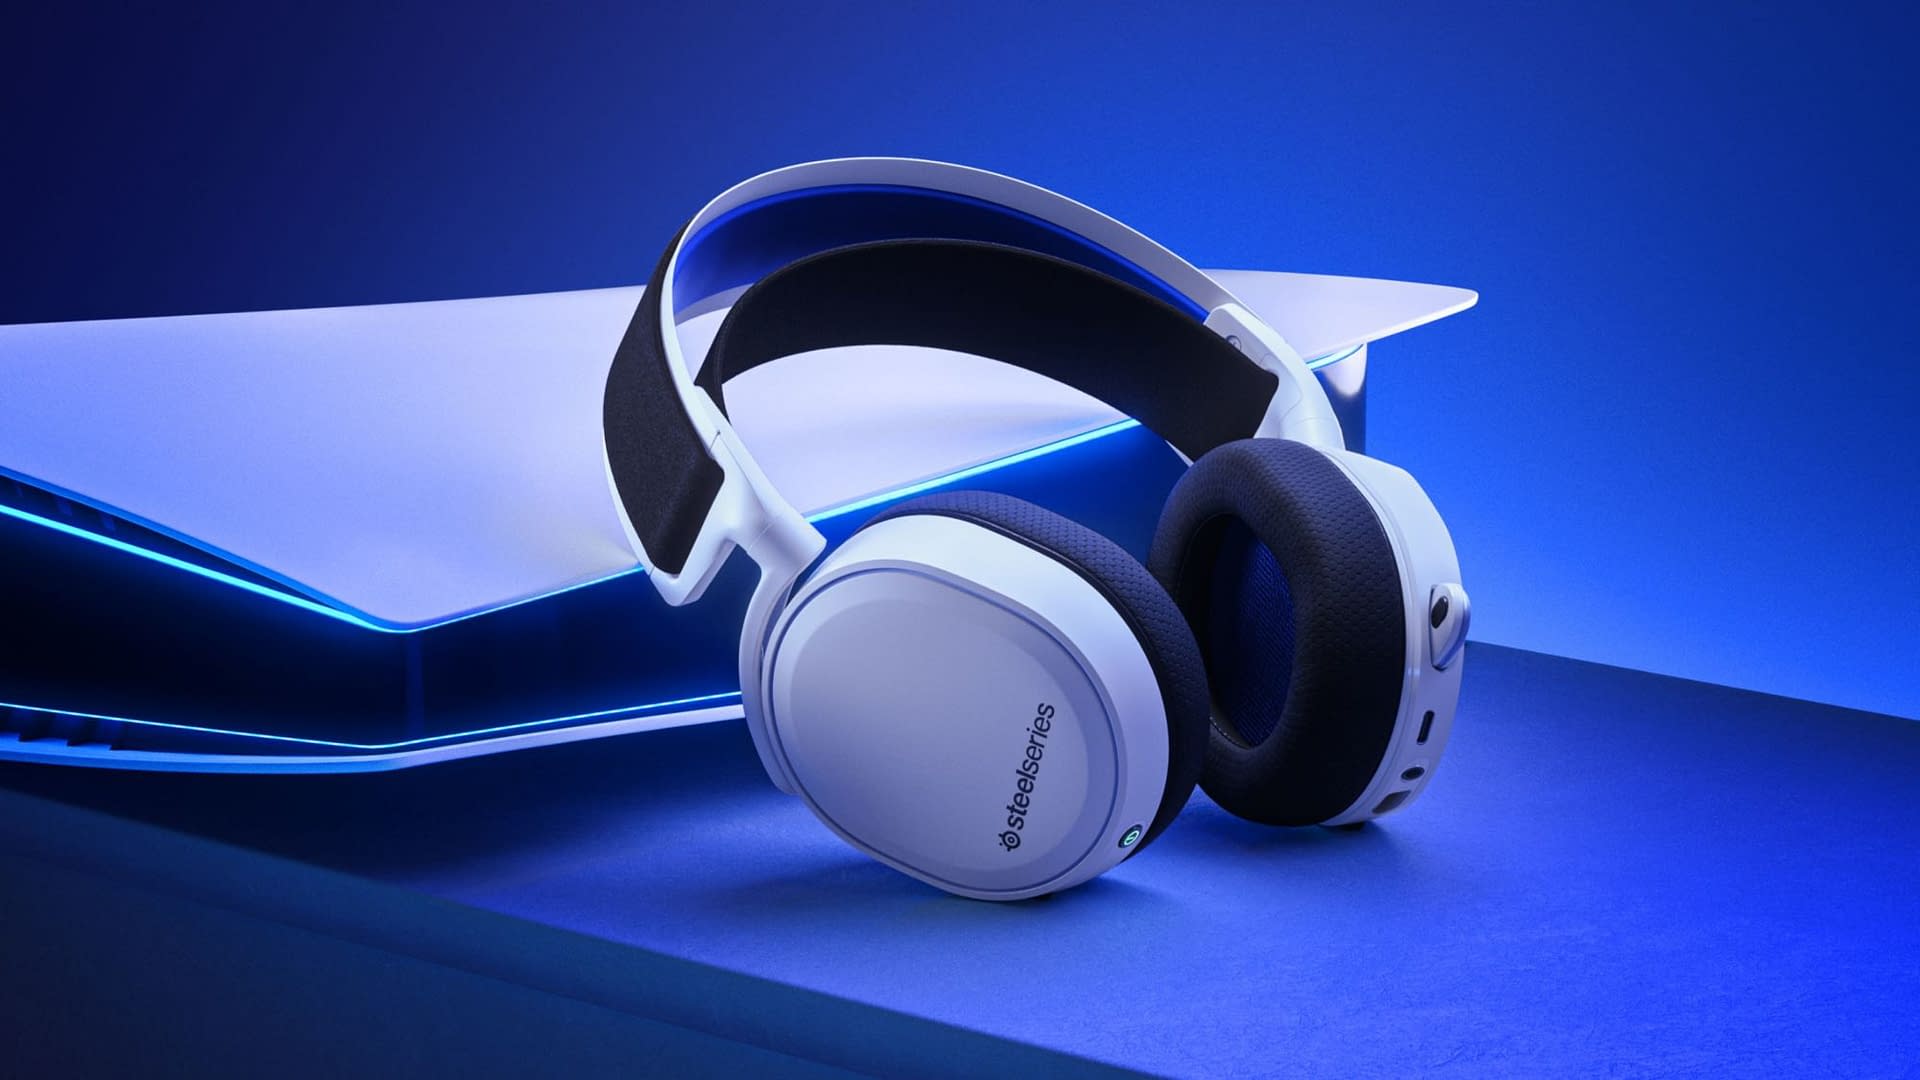 Steelseries Unveils New Arctis 7 Wireless Gaming Headsets